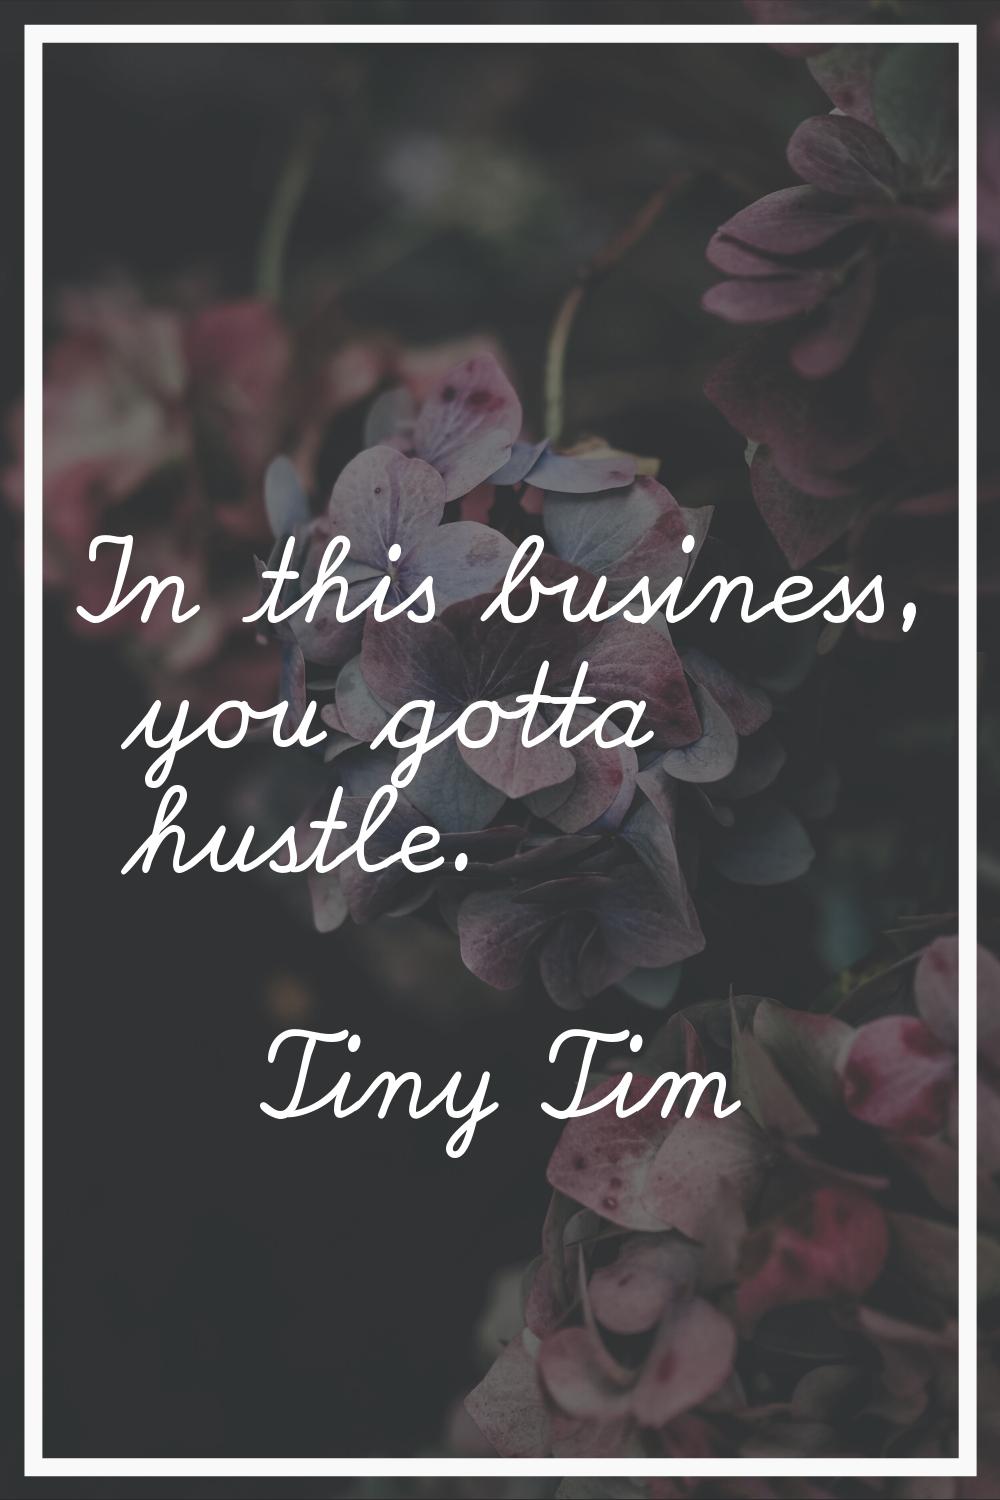 In this business, you gotta hustle.